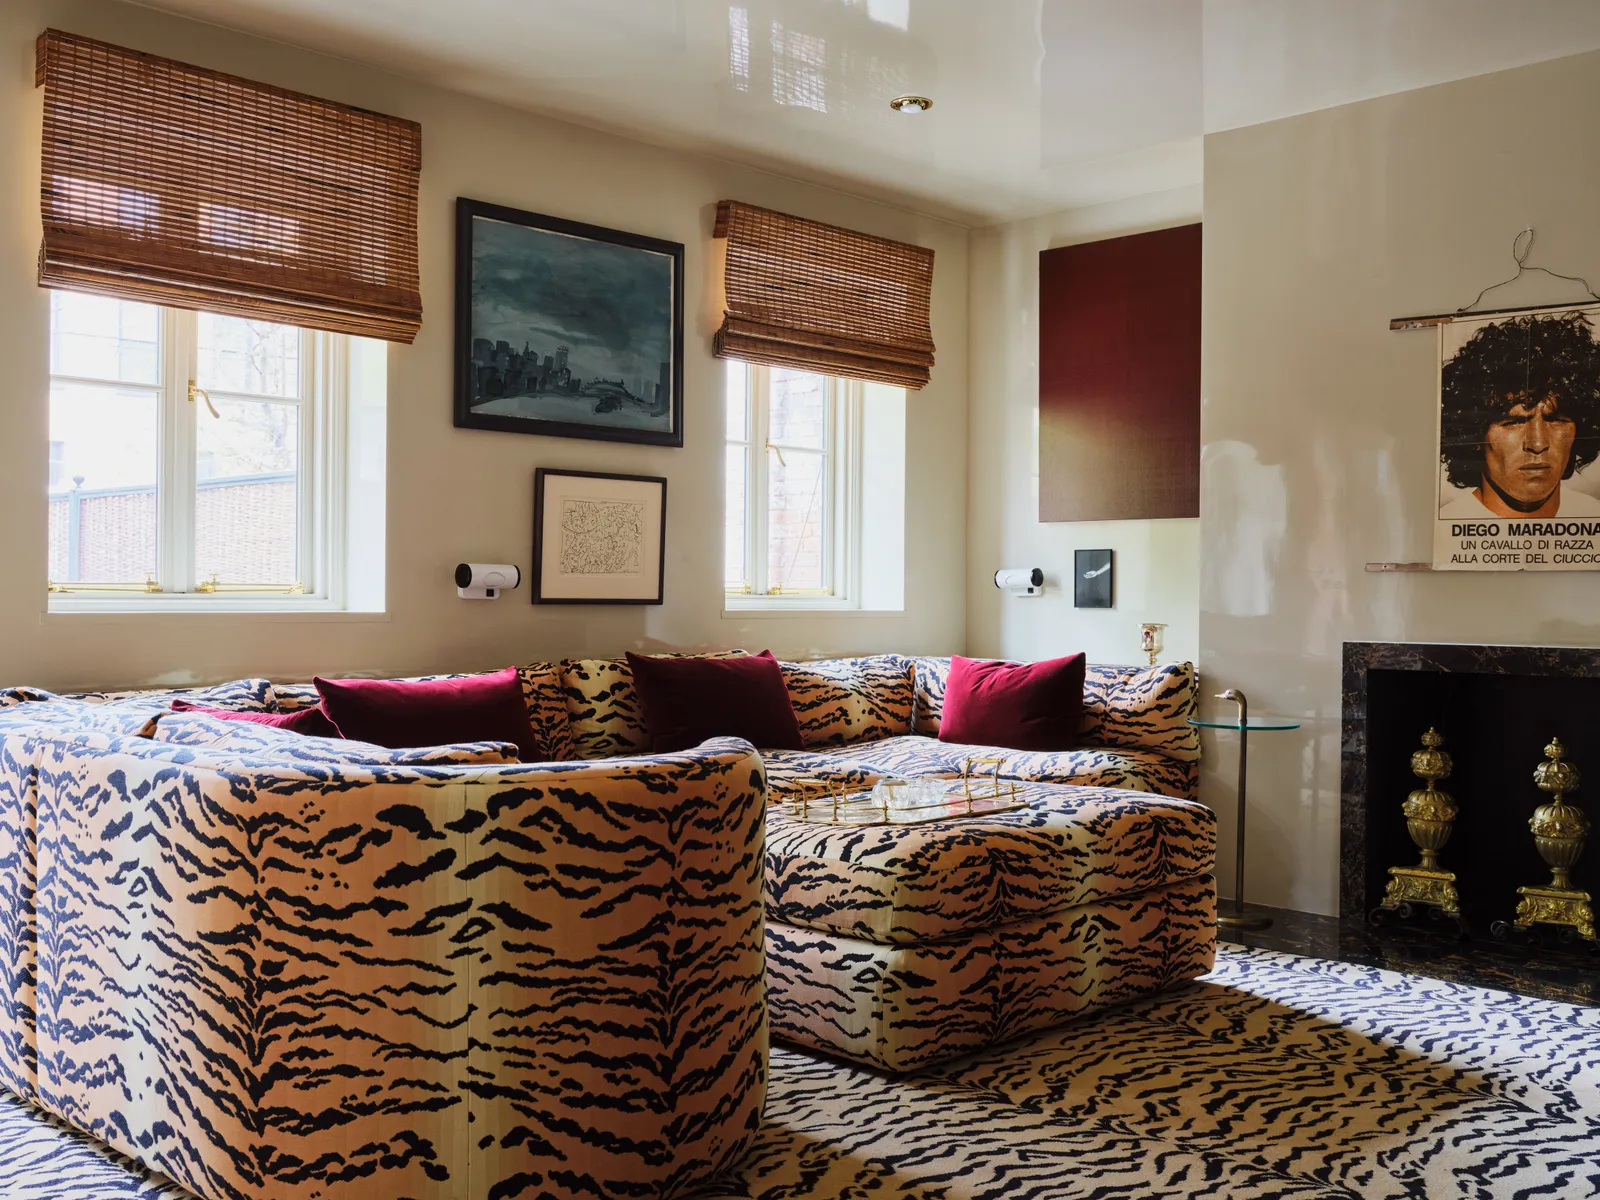 living room with animal print patter in the sofa and carpet